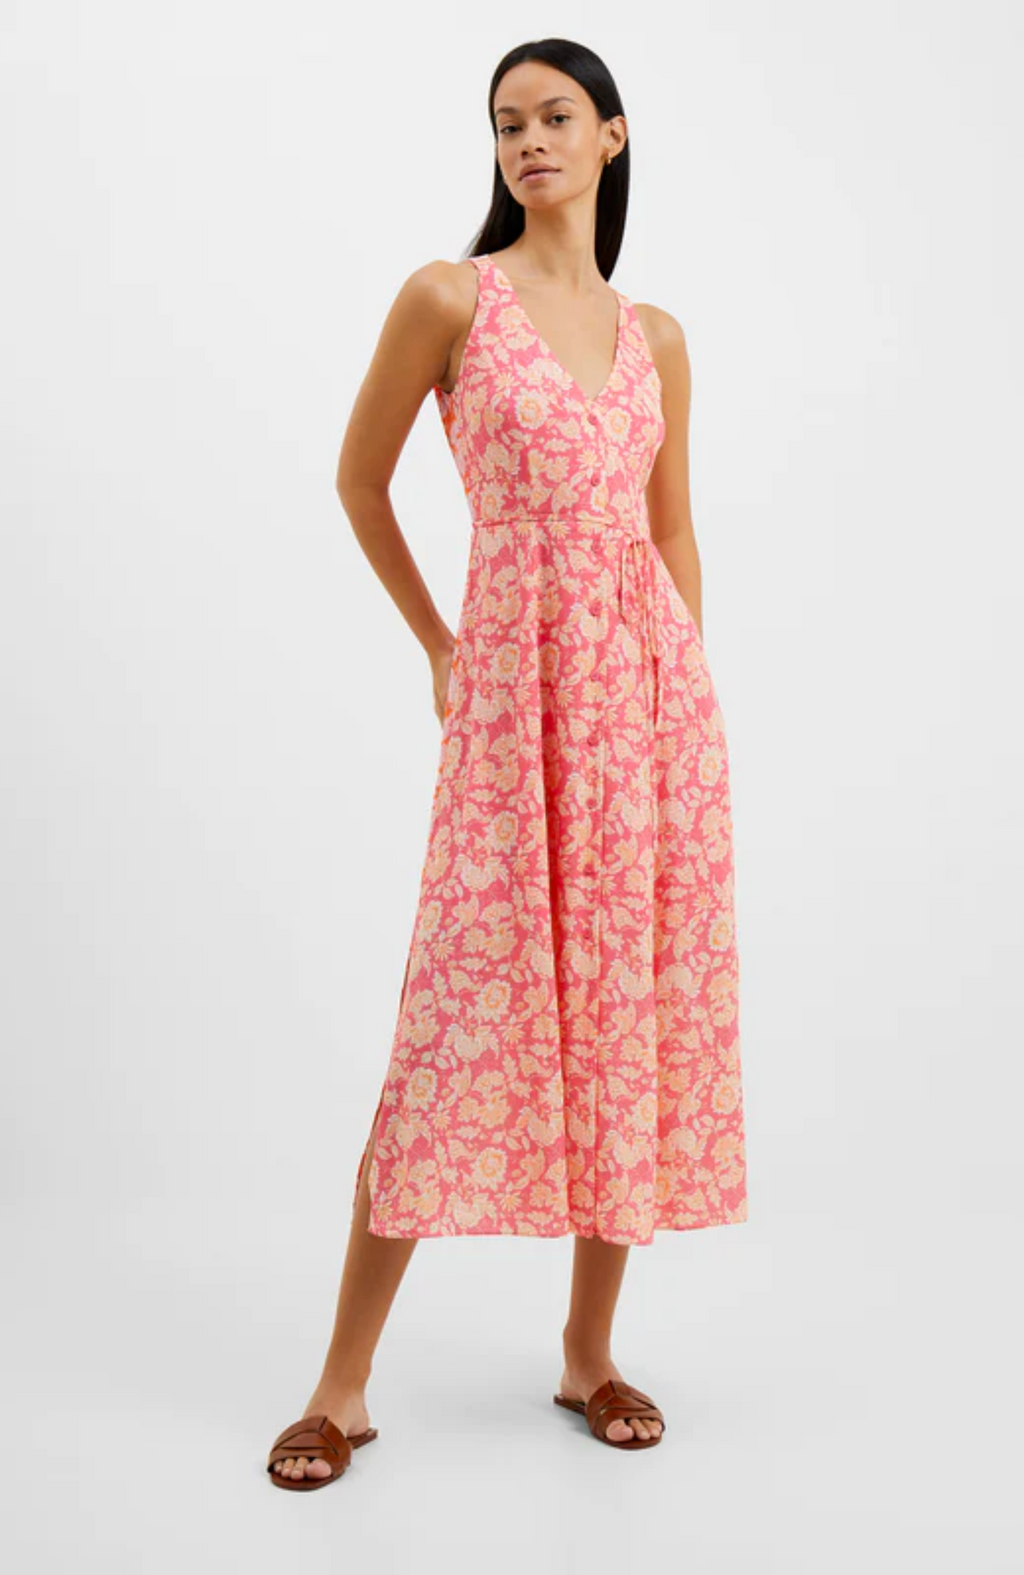 French Connection - Cosette Verona Crepe Dress